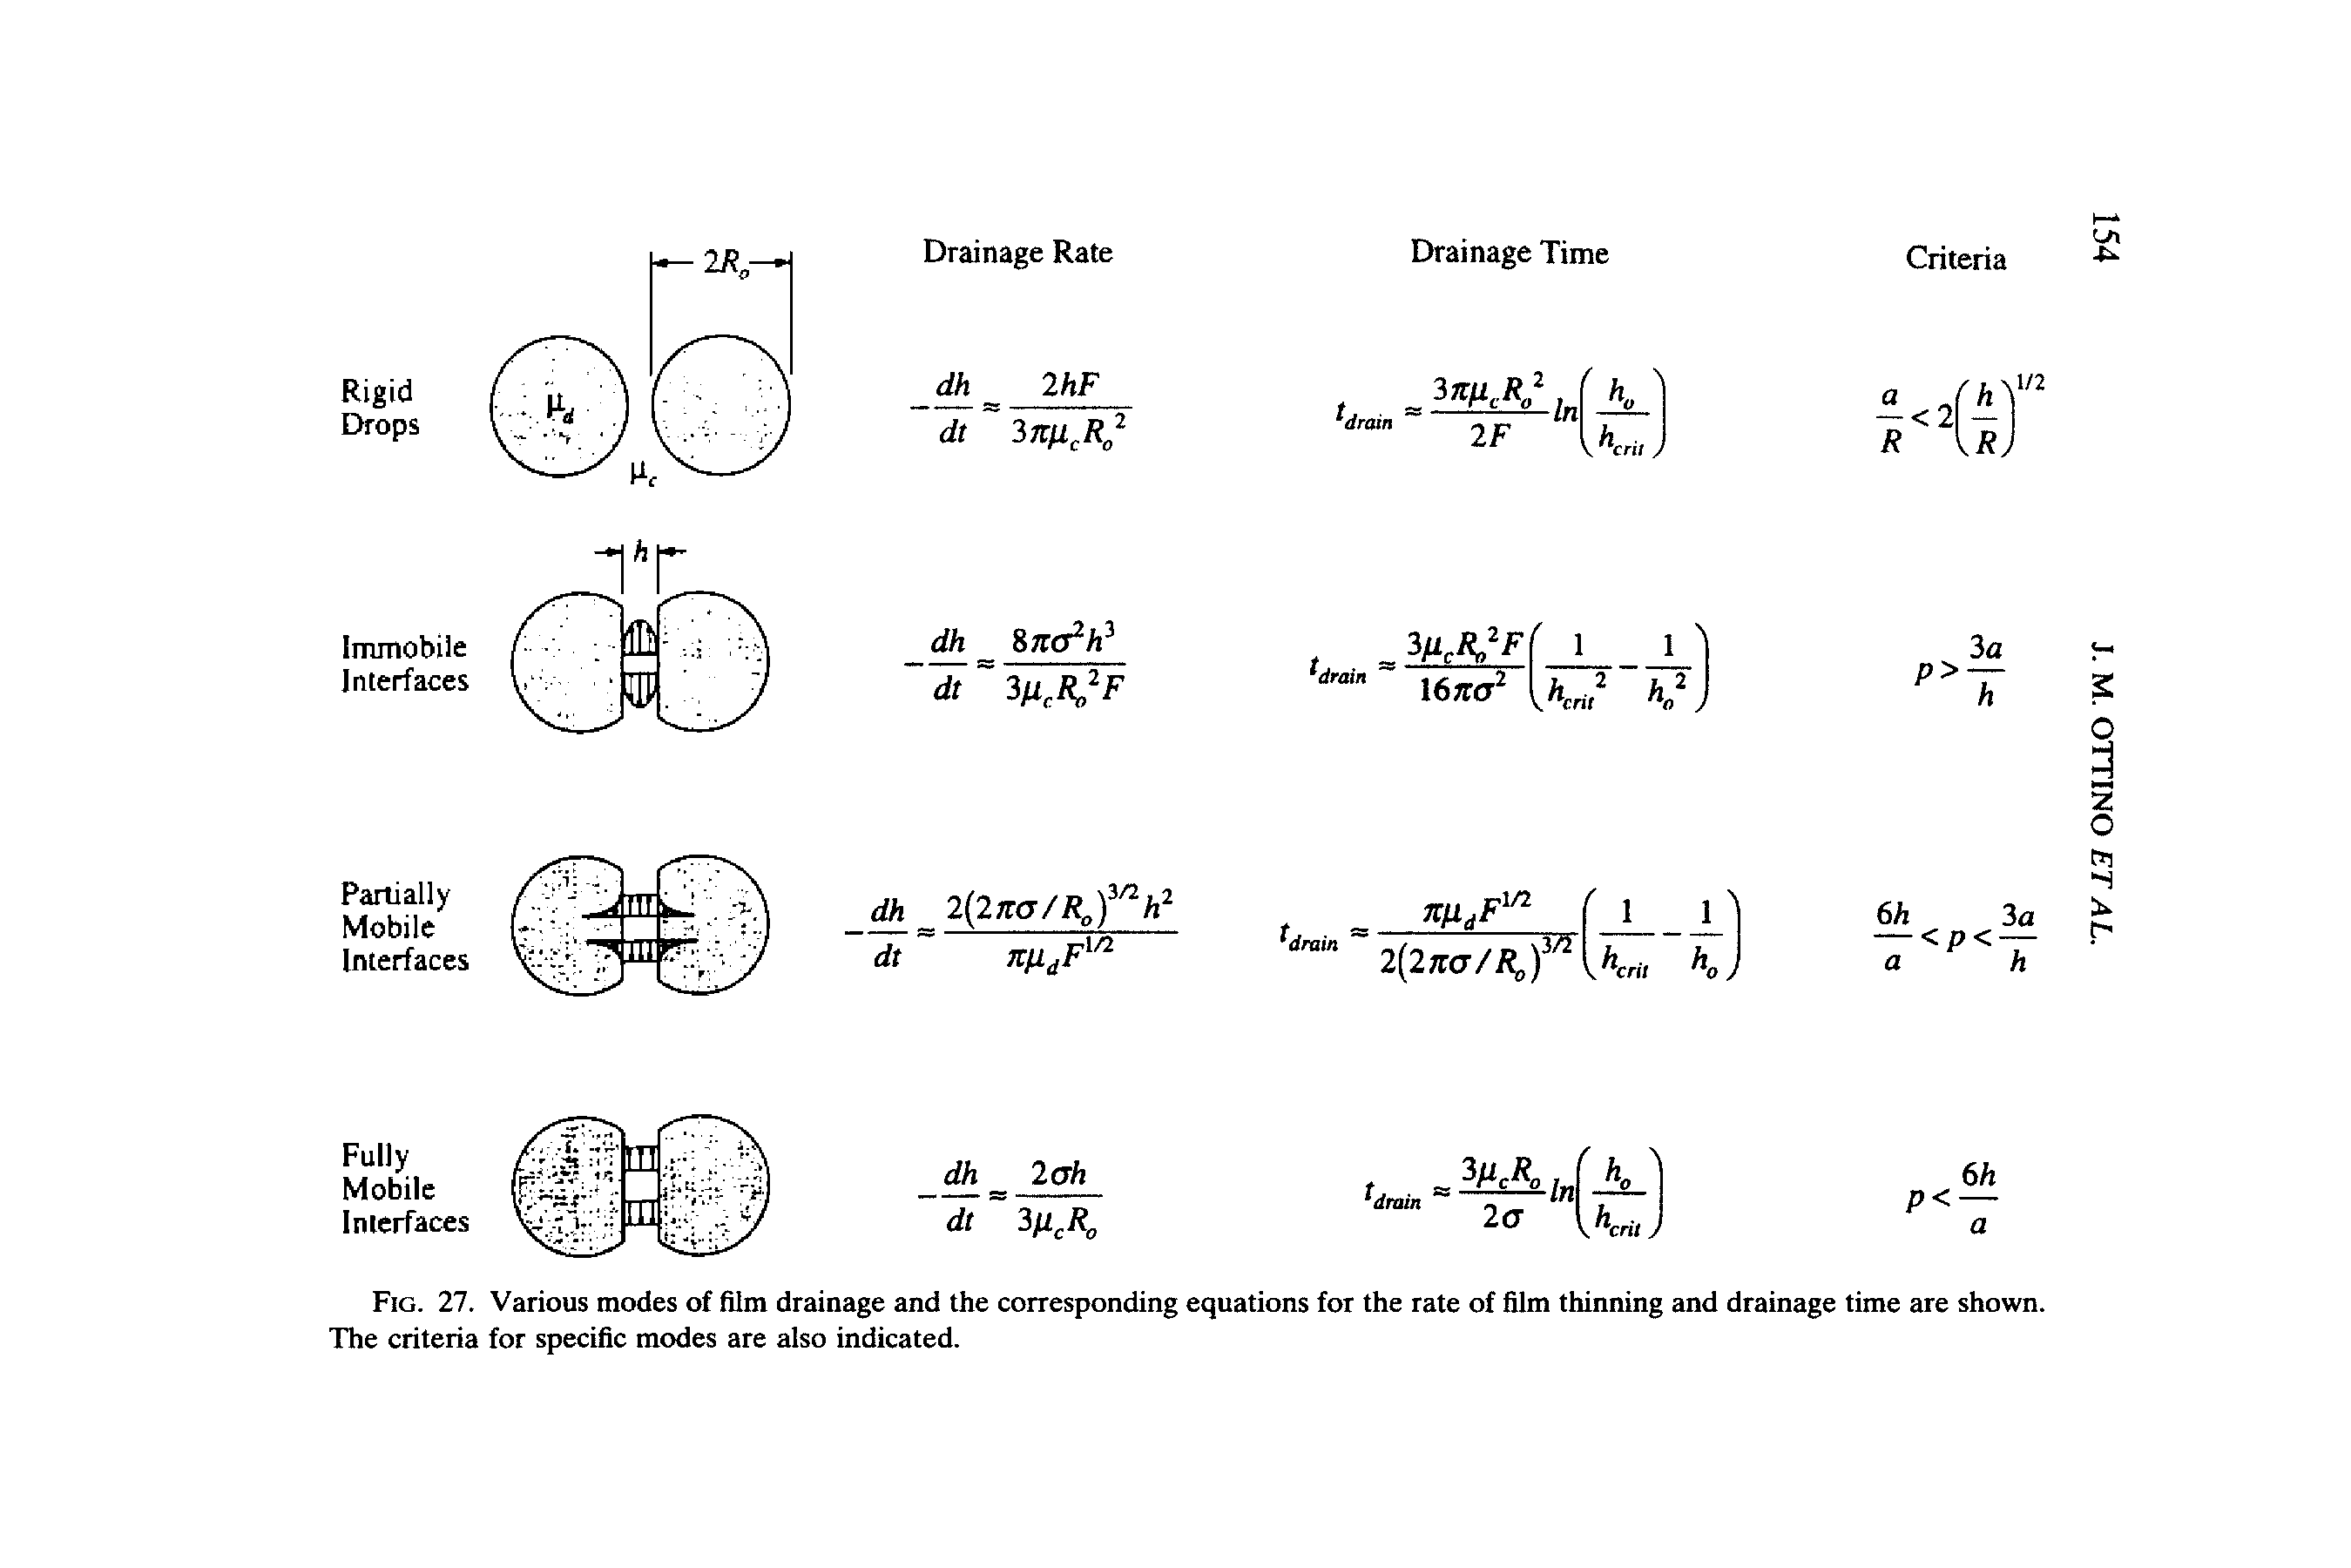 Fig. 27. Various modes of film drainage and the corresponding equations for the rate of film thinning and drainage time are shown. The criteria for specific modes are also indicated.